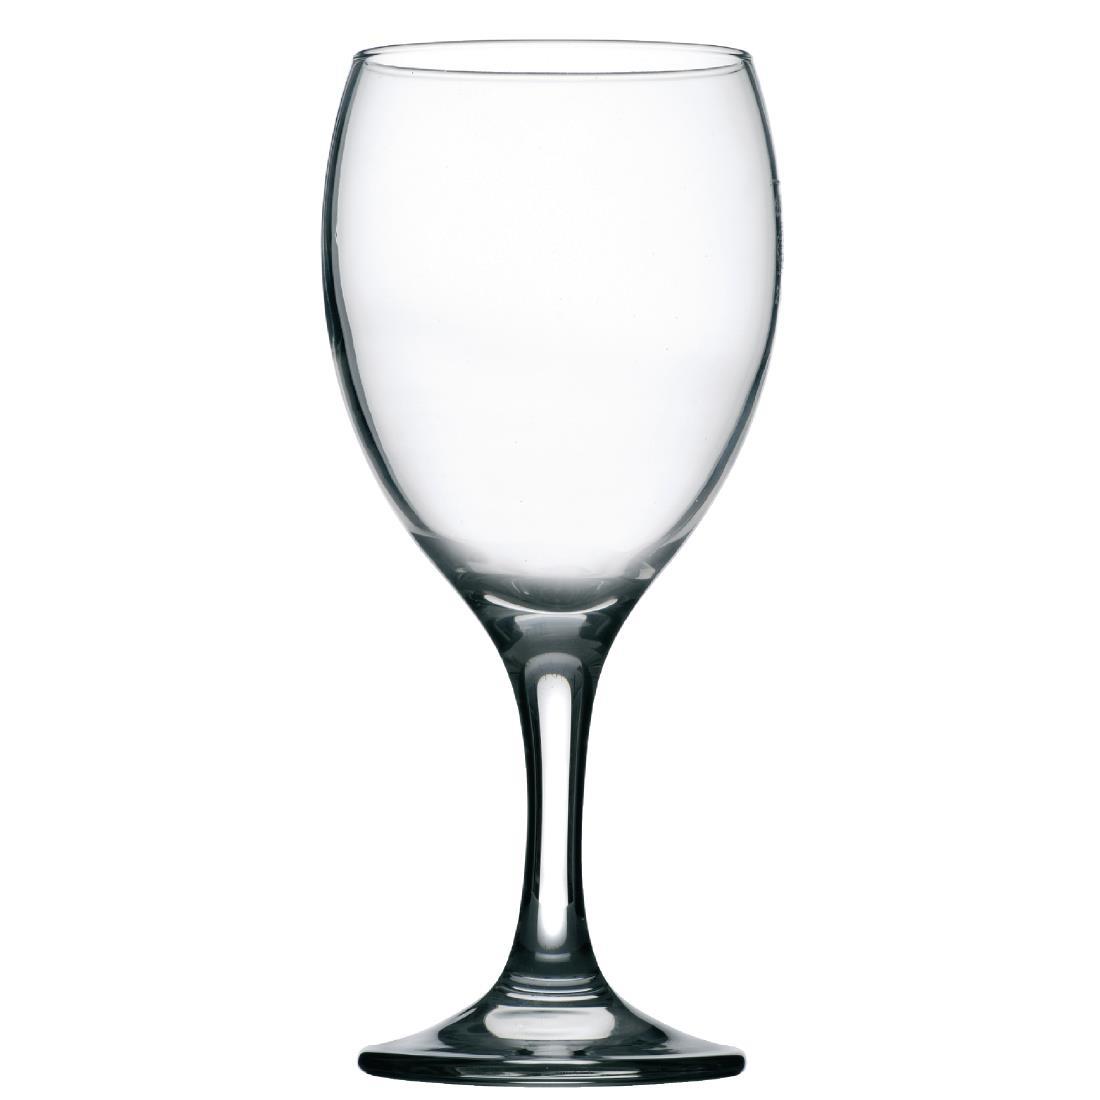 Utopia Imperial Wine Glasses 340ml CE Marked at 125ml 175ml and 250ml (Pack of 12) - DL209  - 1